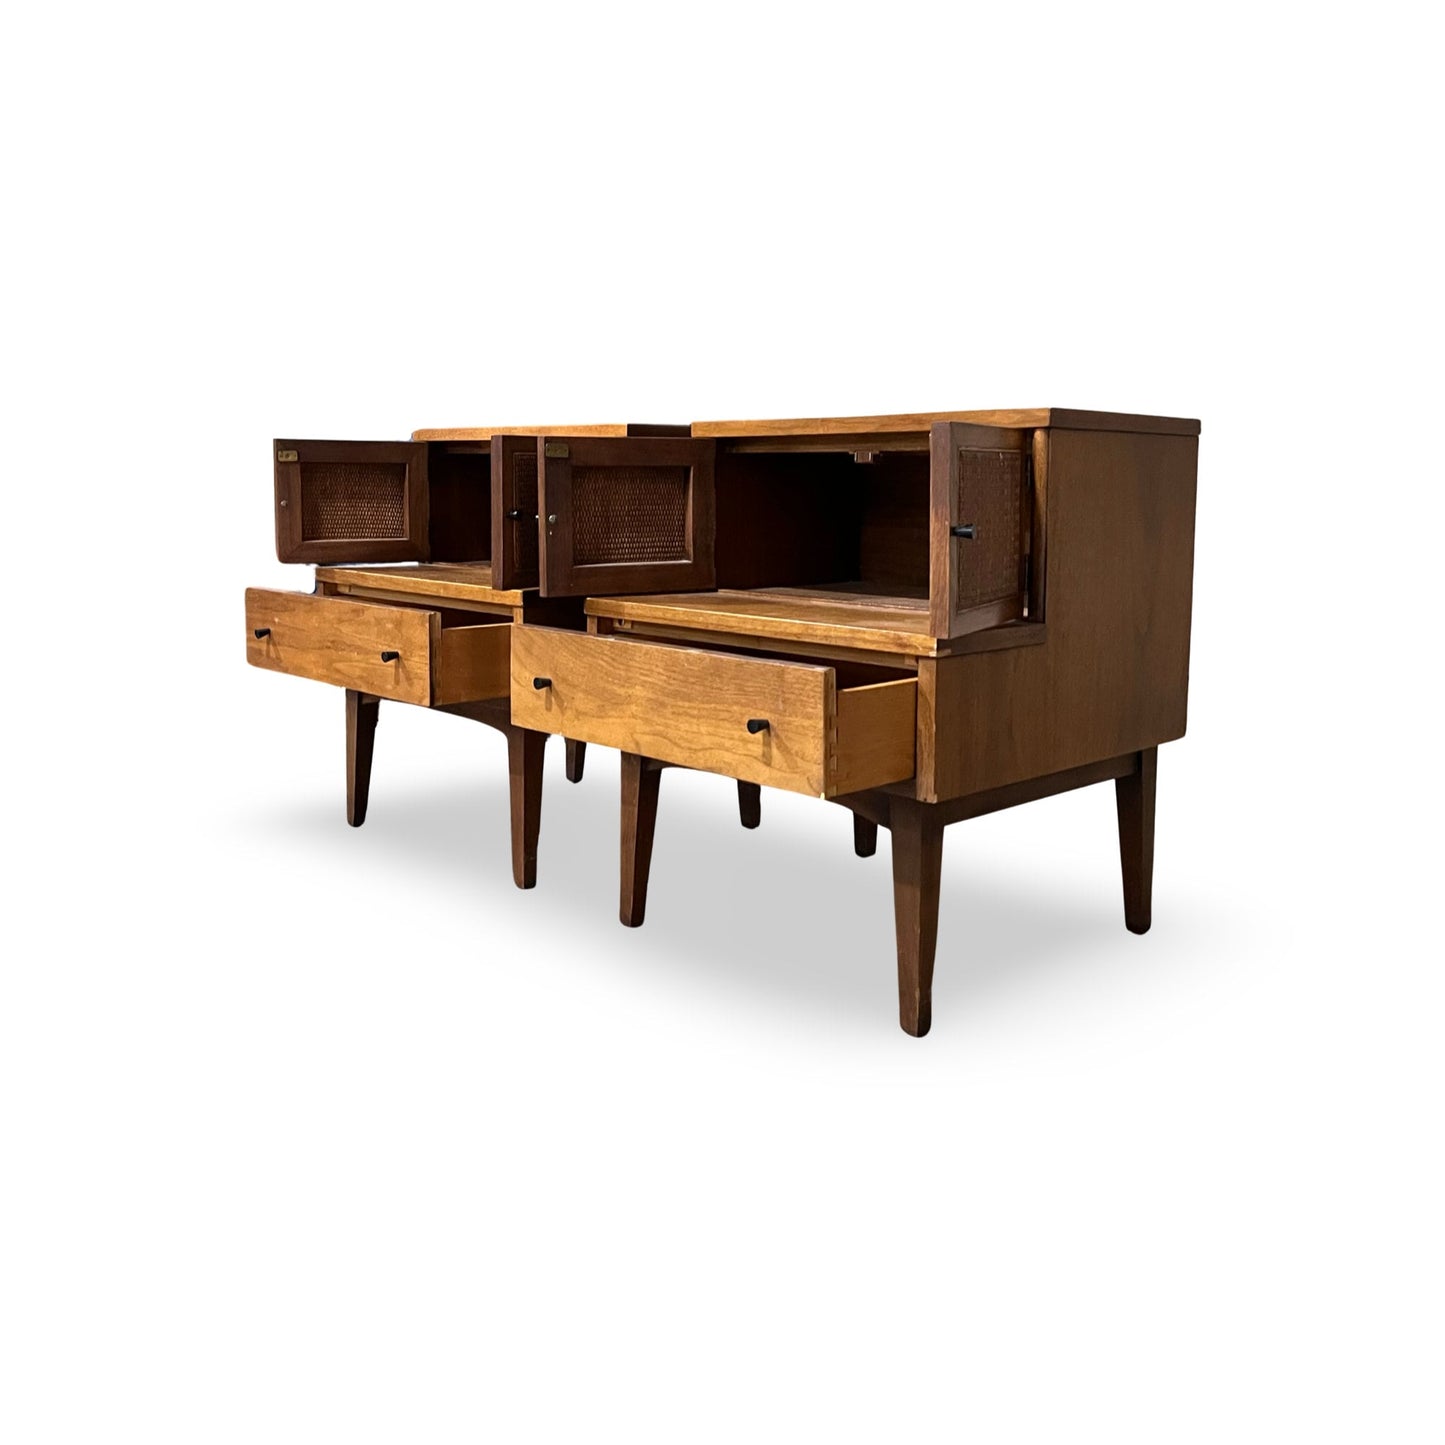 Stylish nightstands with splayed legs and brass knobs, offering ample storage.